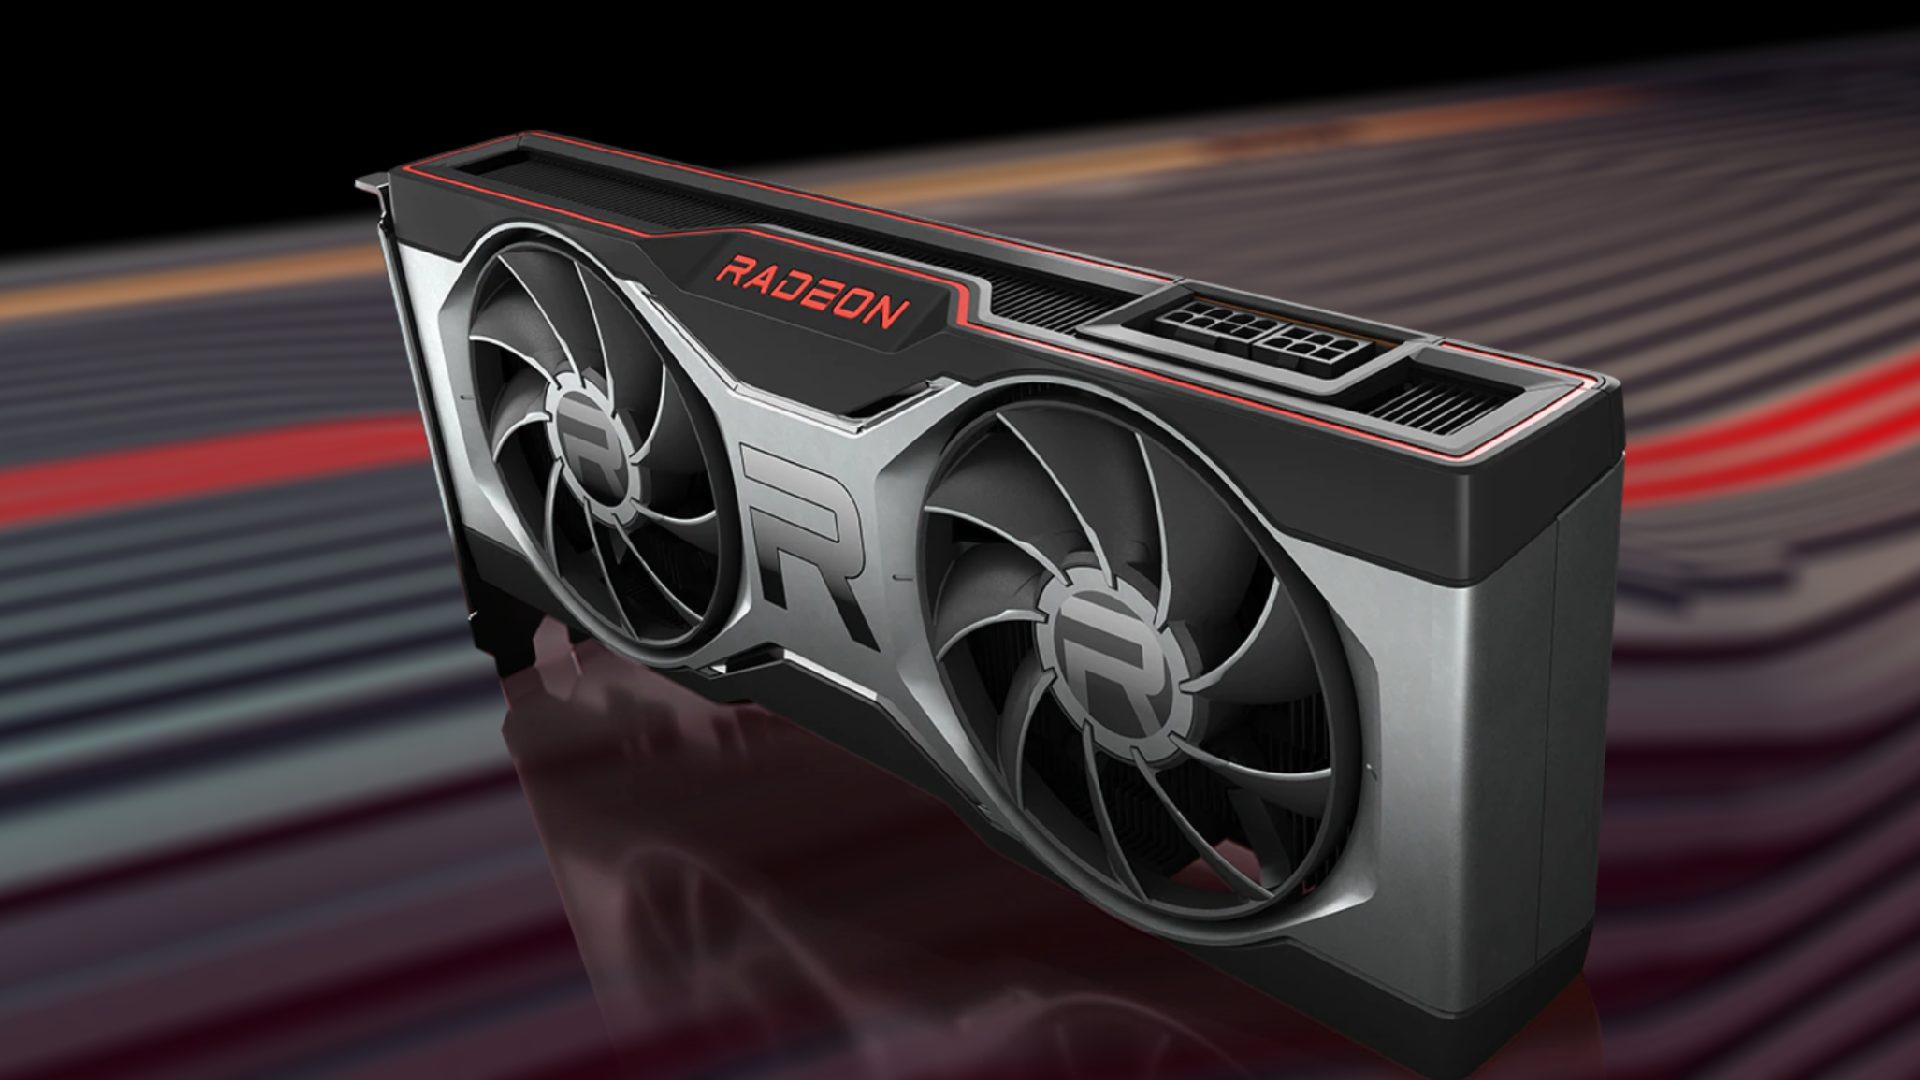 AMD Radeon RX 7900 XTX – release date, price, specs, and benchmarks